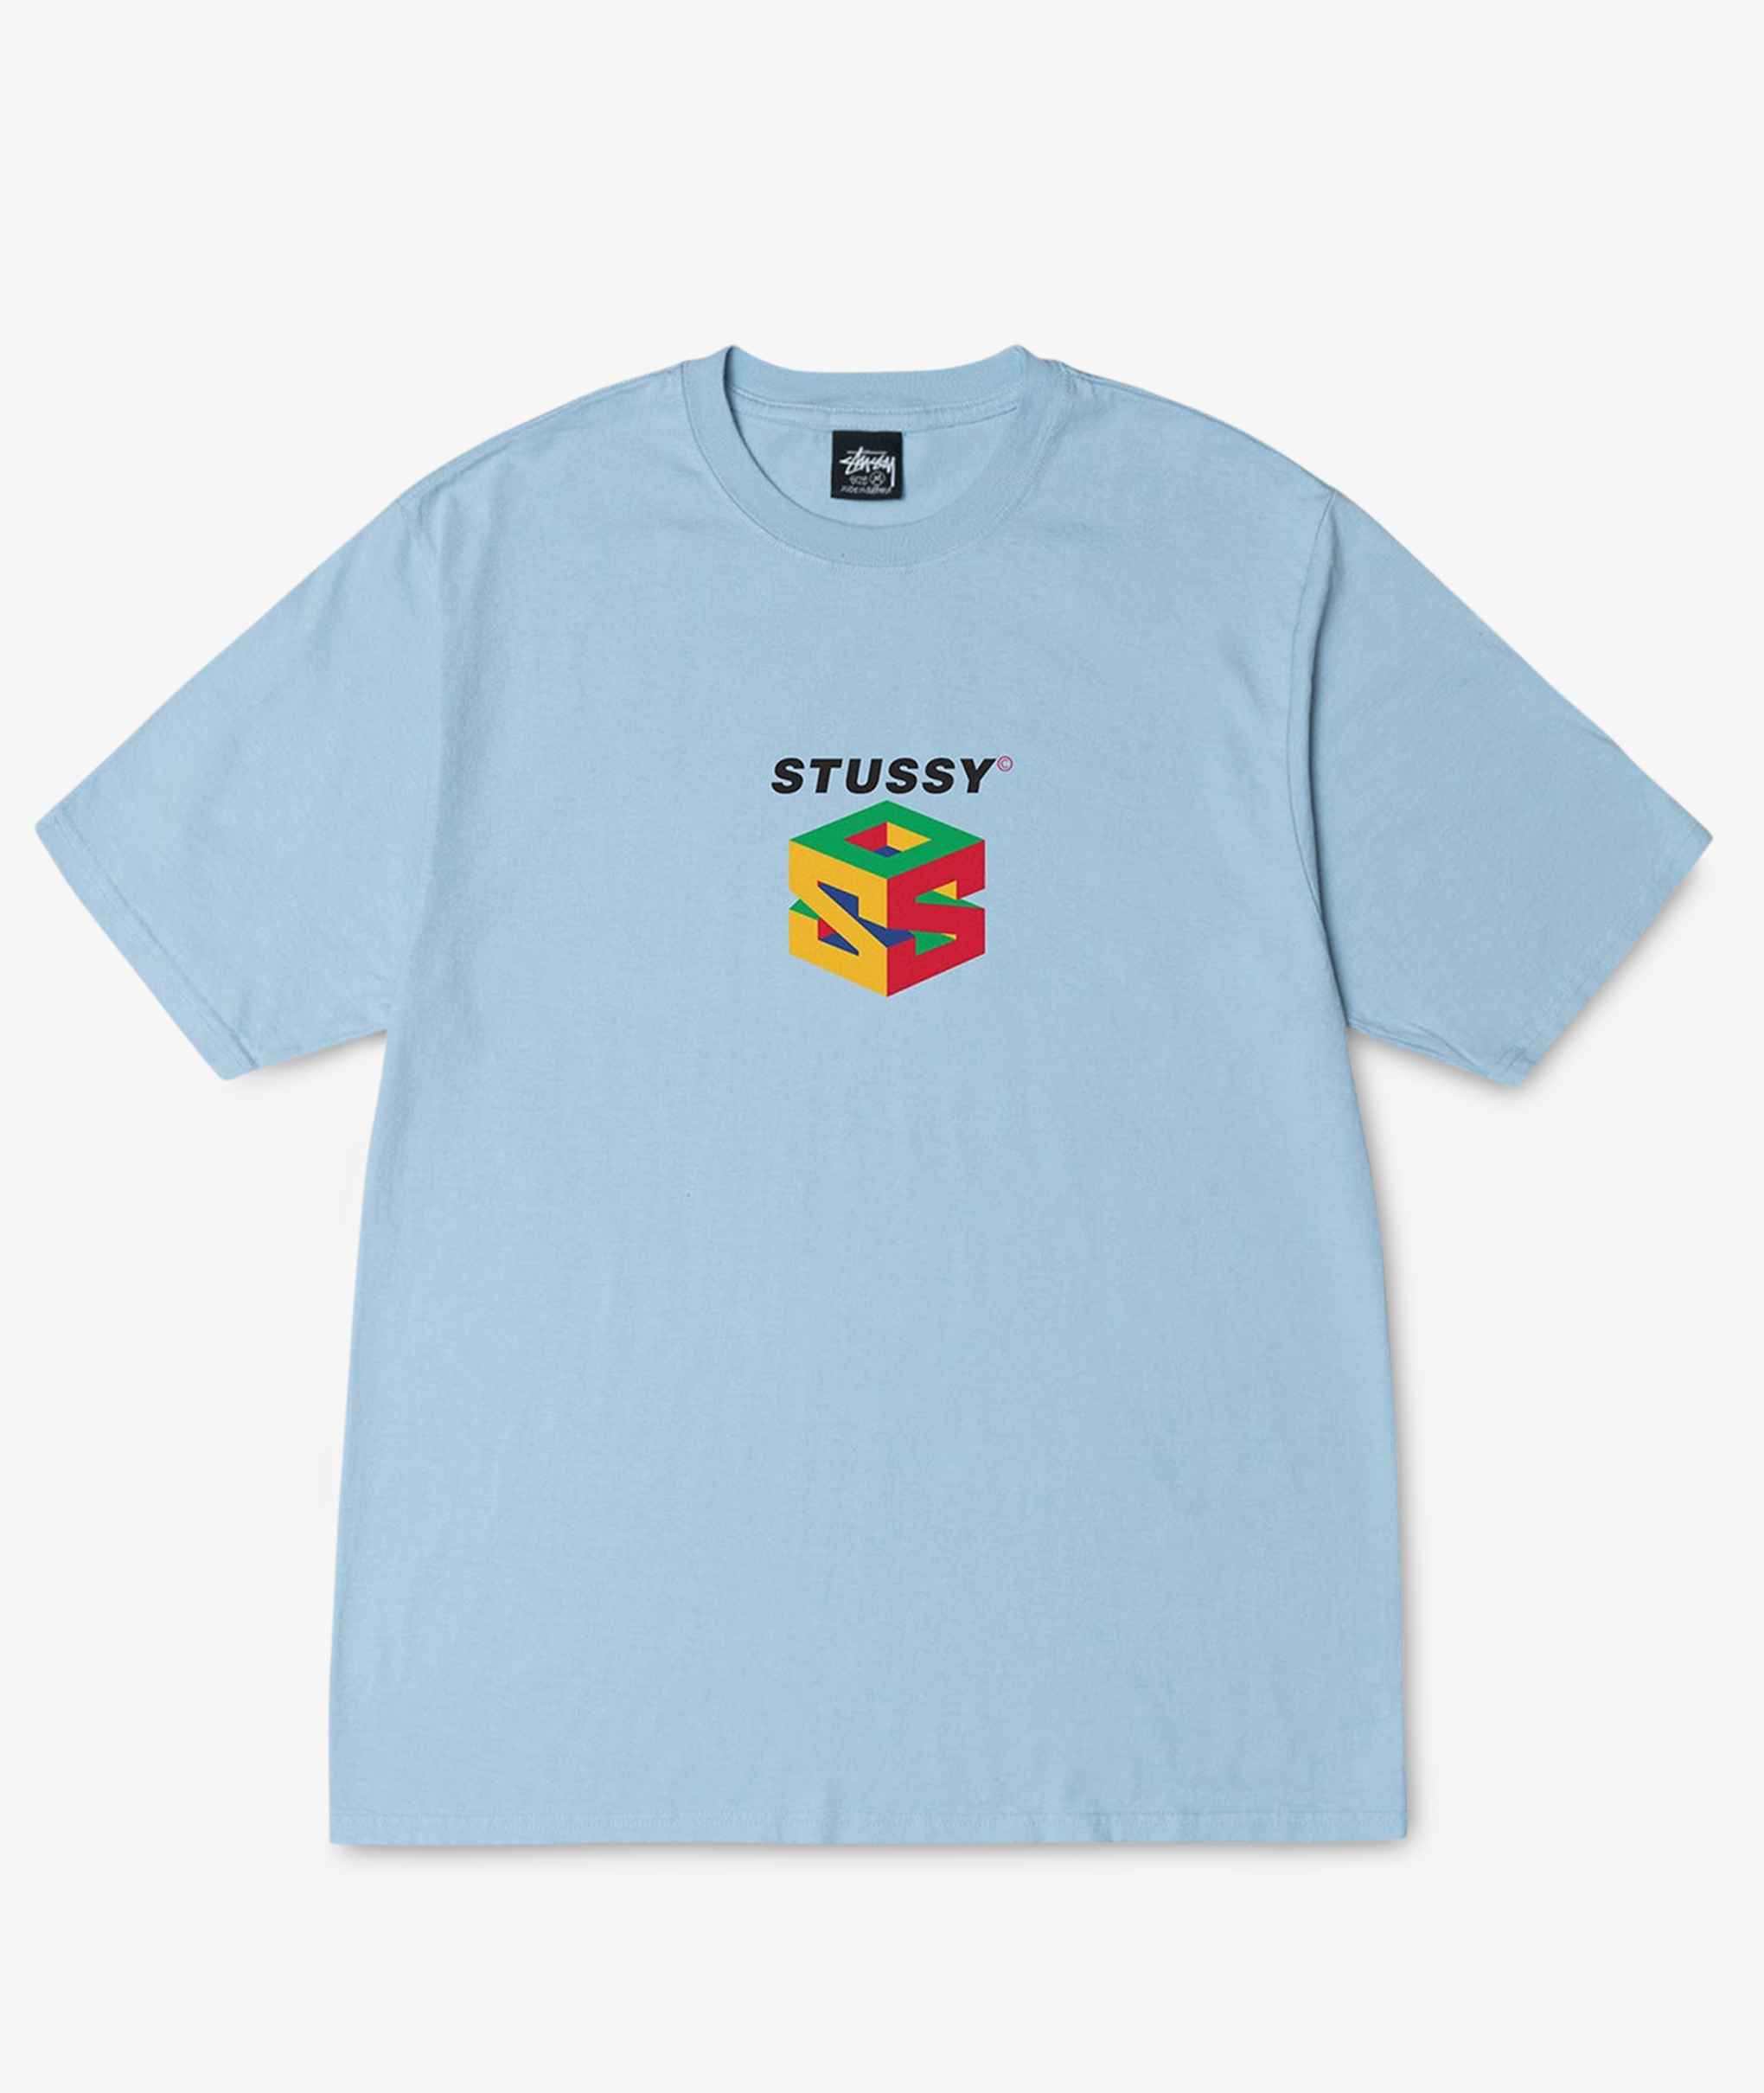 Norse Store | Shipping Worldwide - Stüssy S64 Pig. Dyed Tee - Sky Blue